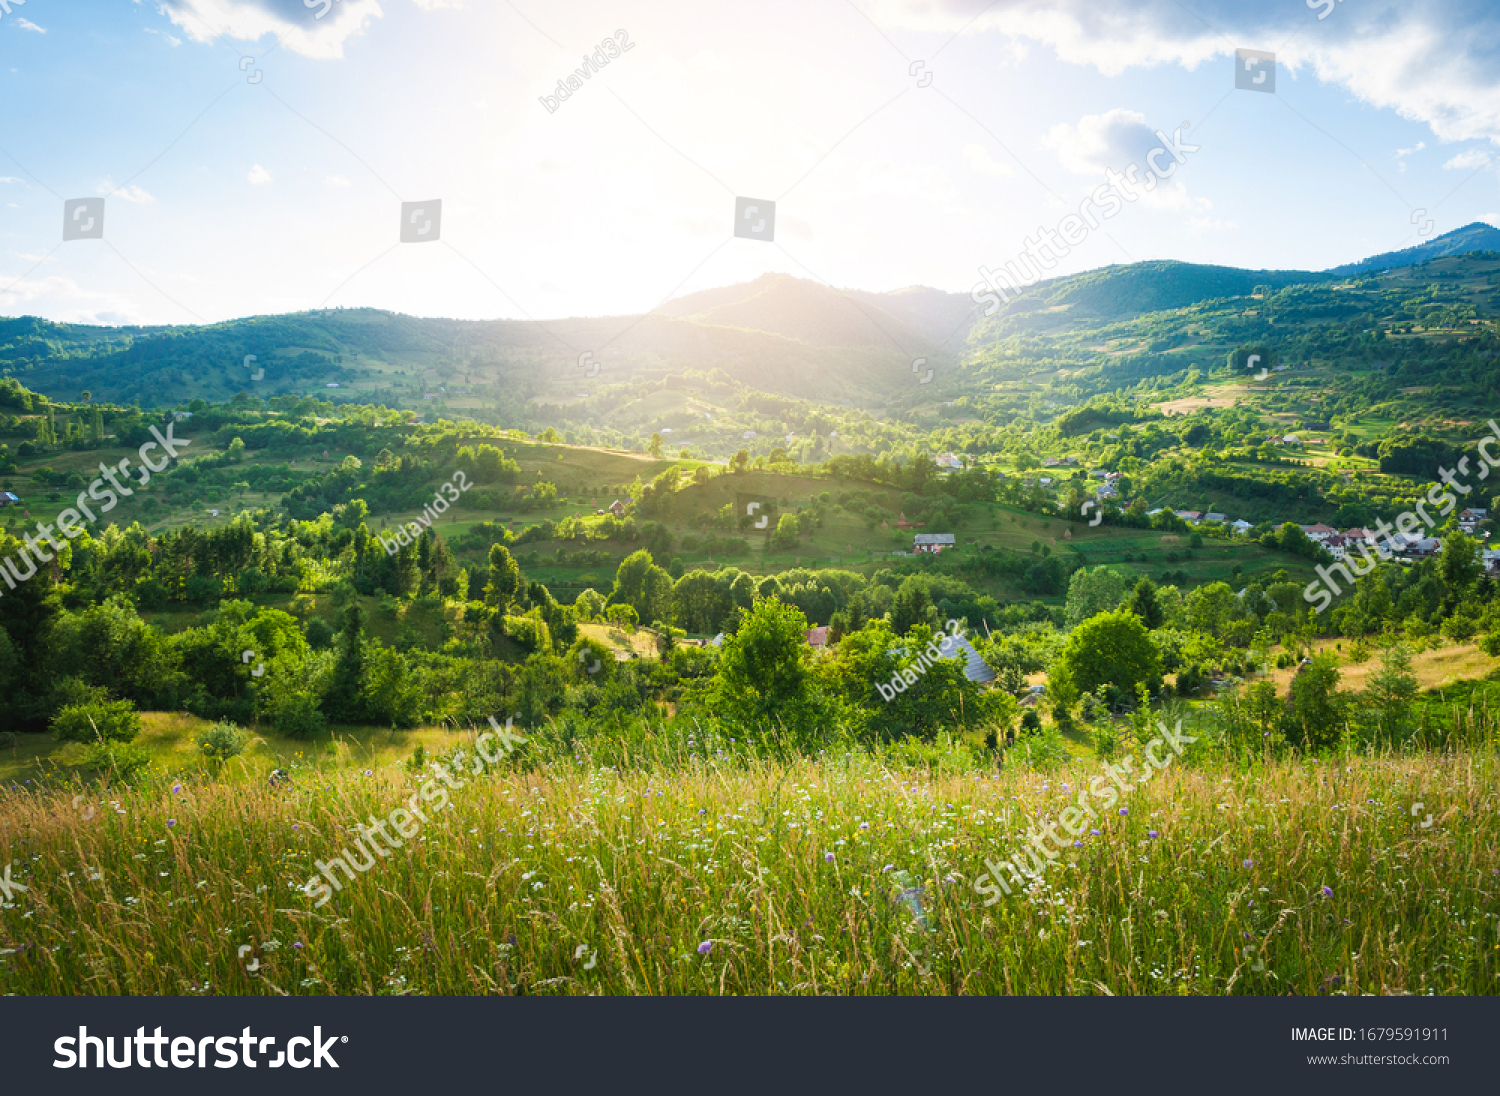 A peaceful landscape, green hills in spring time. A country road is cutting through the immaculate grass, illustrating the idea of travel , tourism or exploring #1679591911